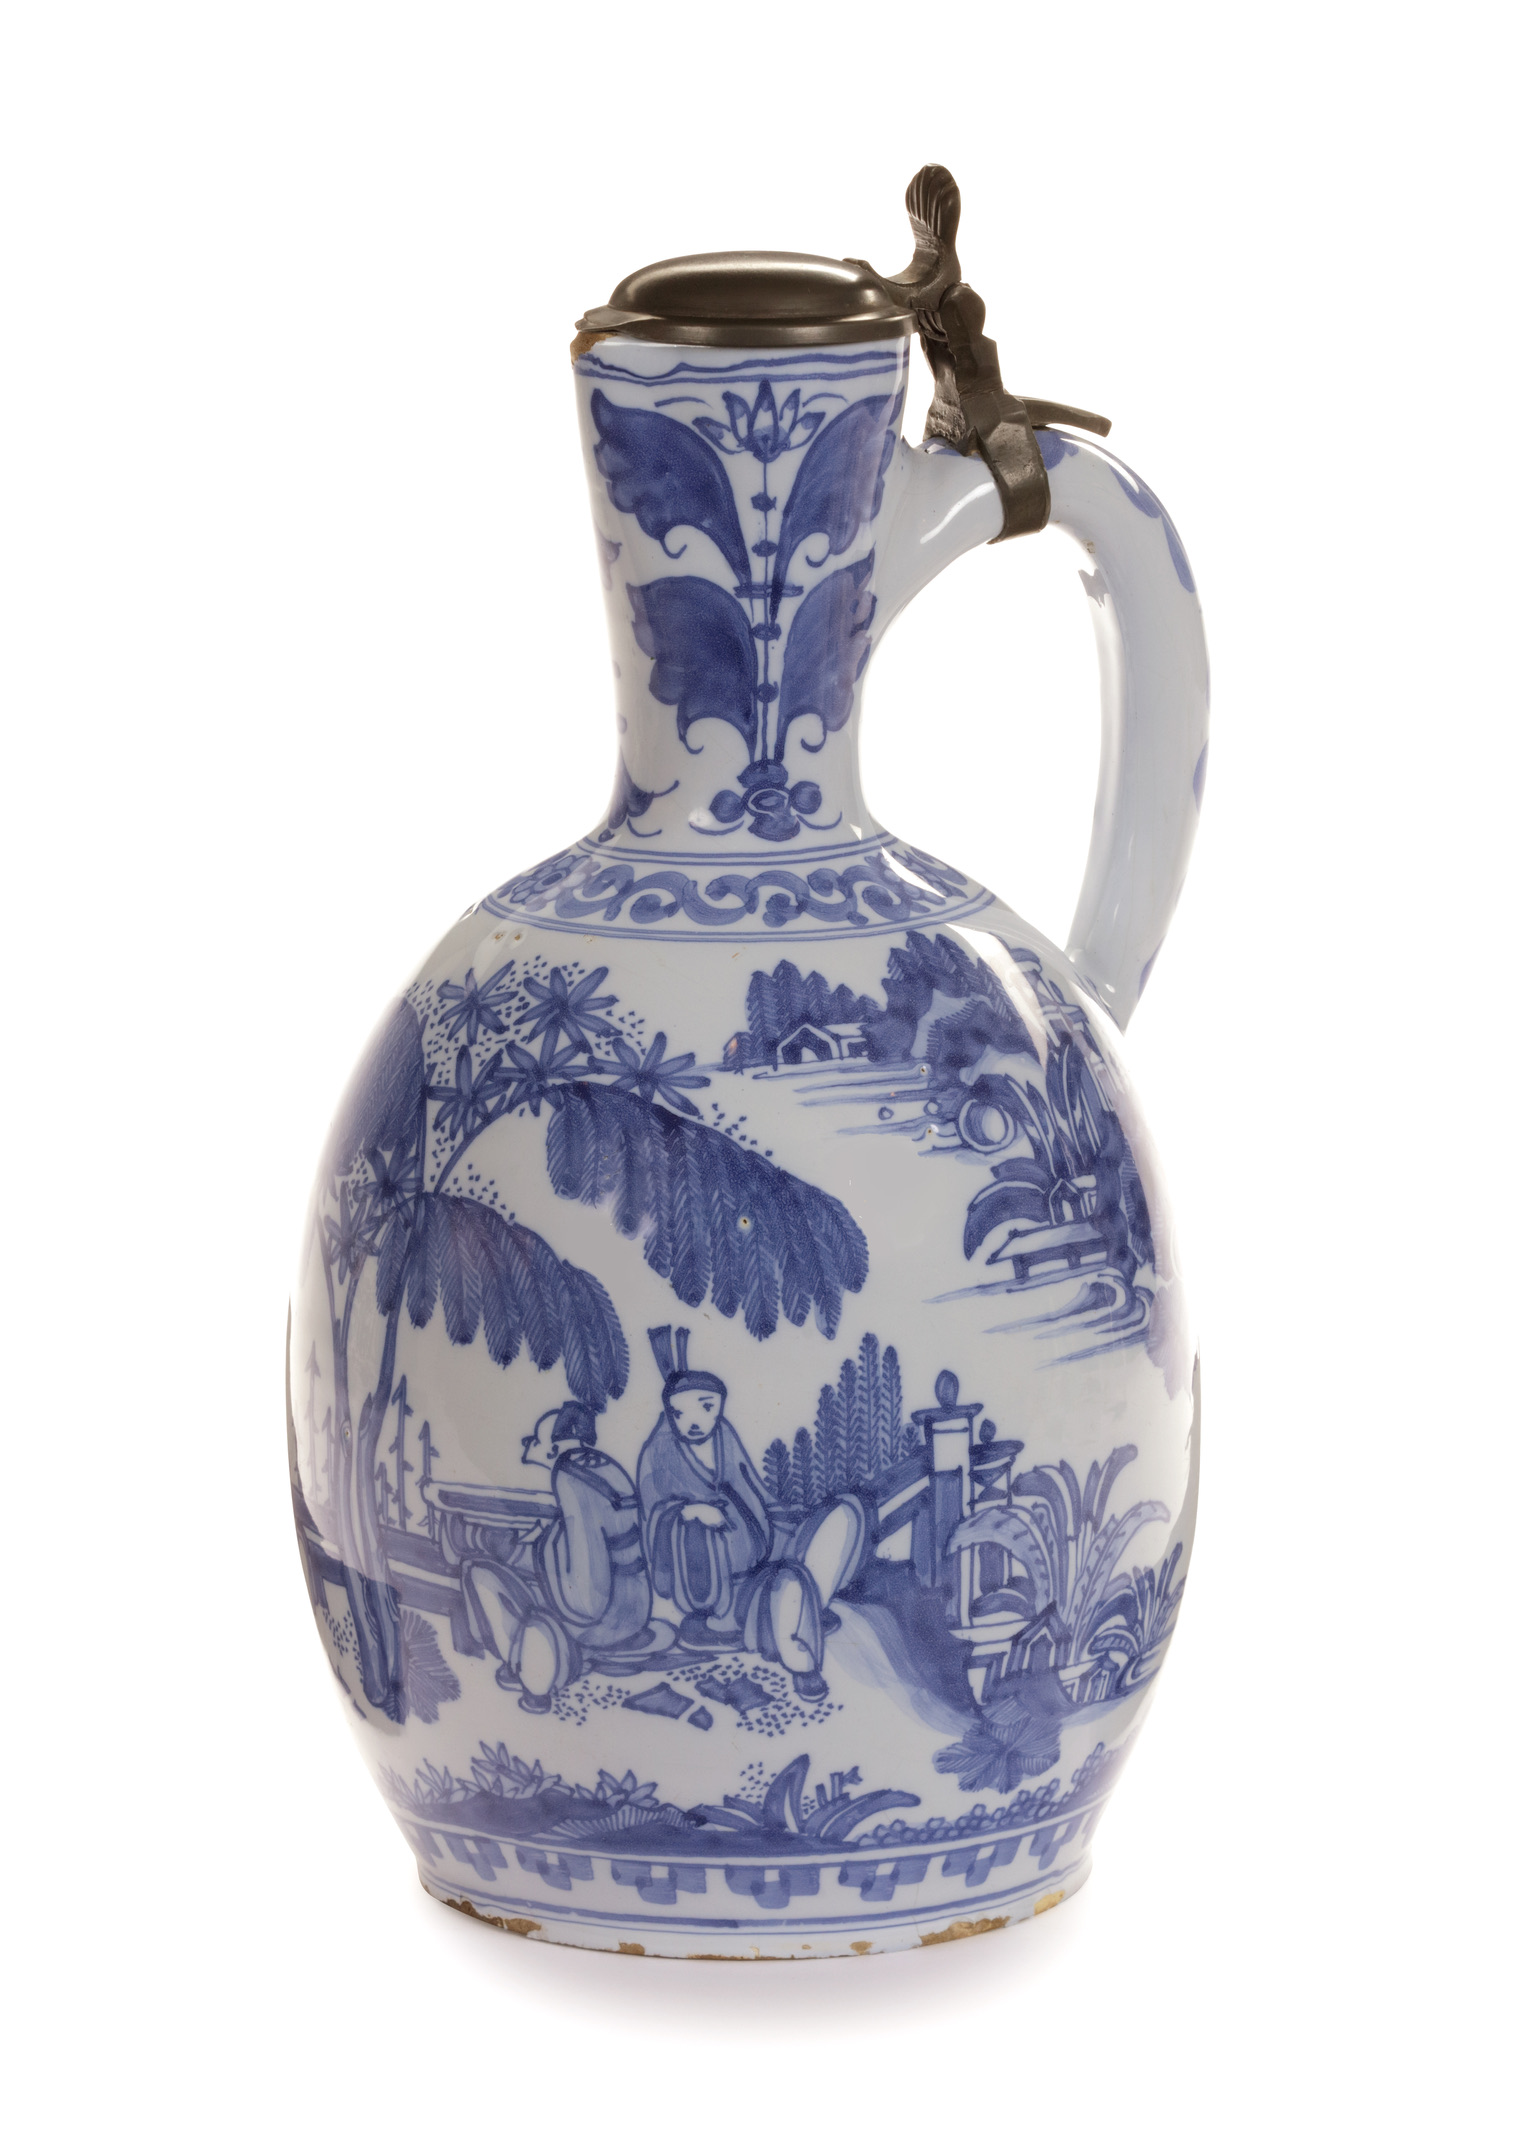 D2304. Large Blue and White Pewter-Mounted Jug